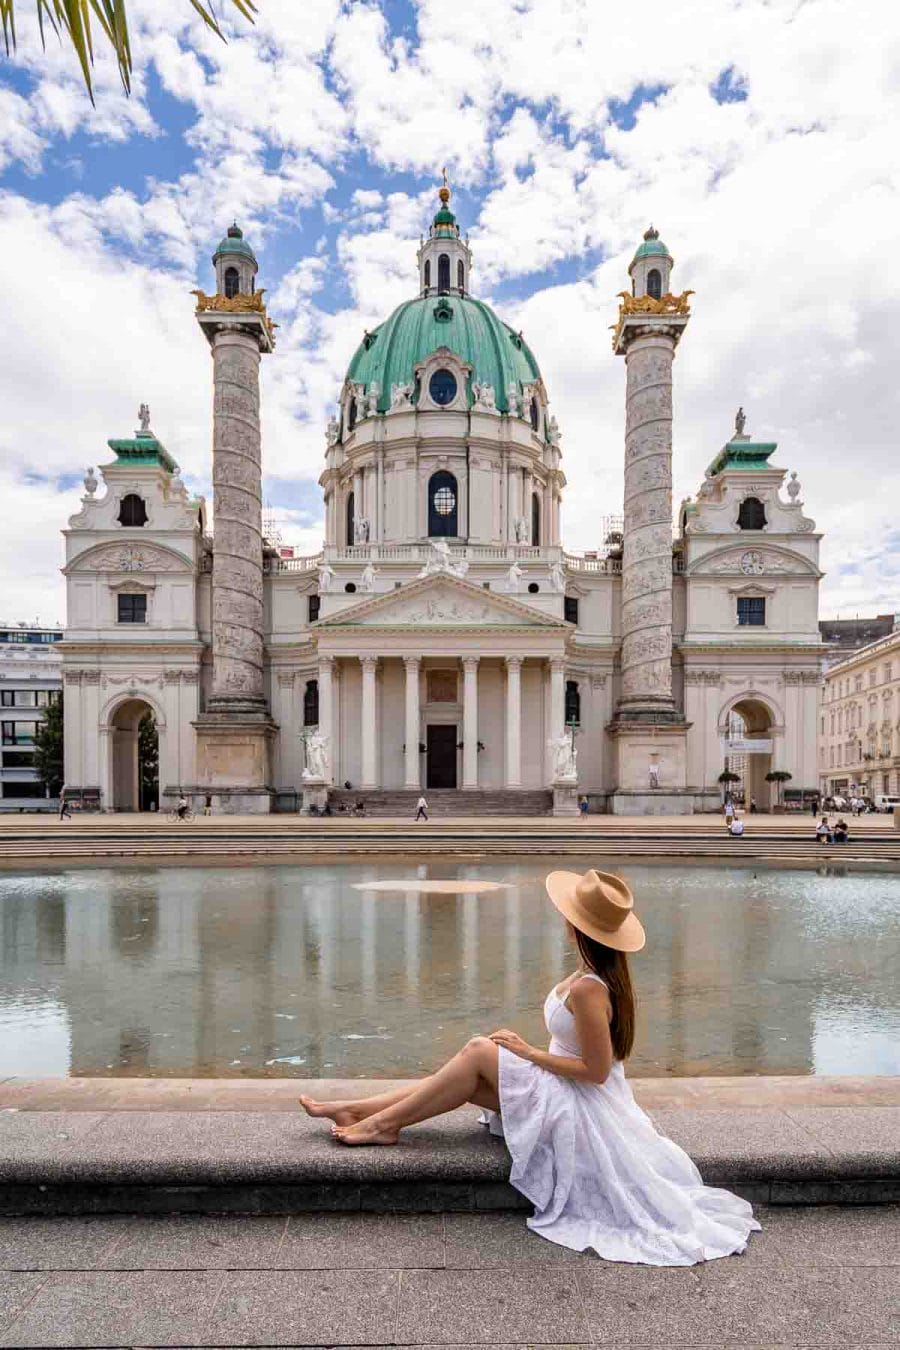 Girl in a white dress sitting in front of Karlskirche, Vienna